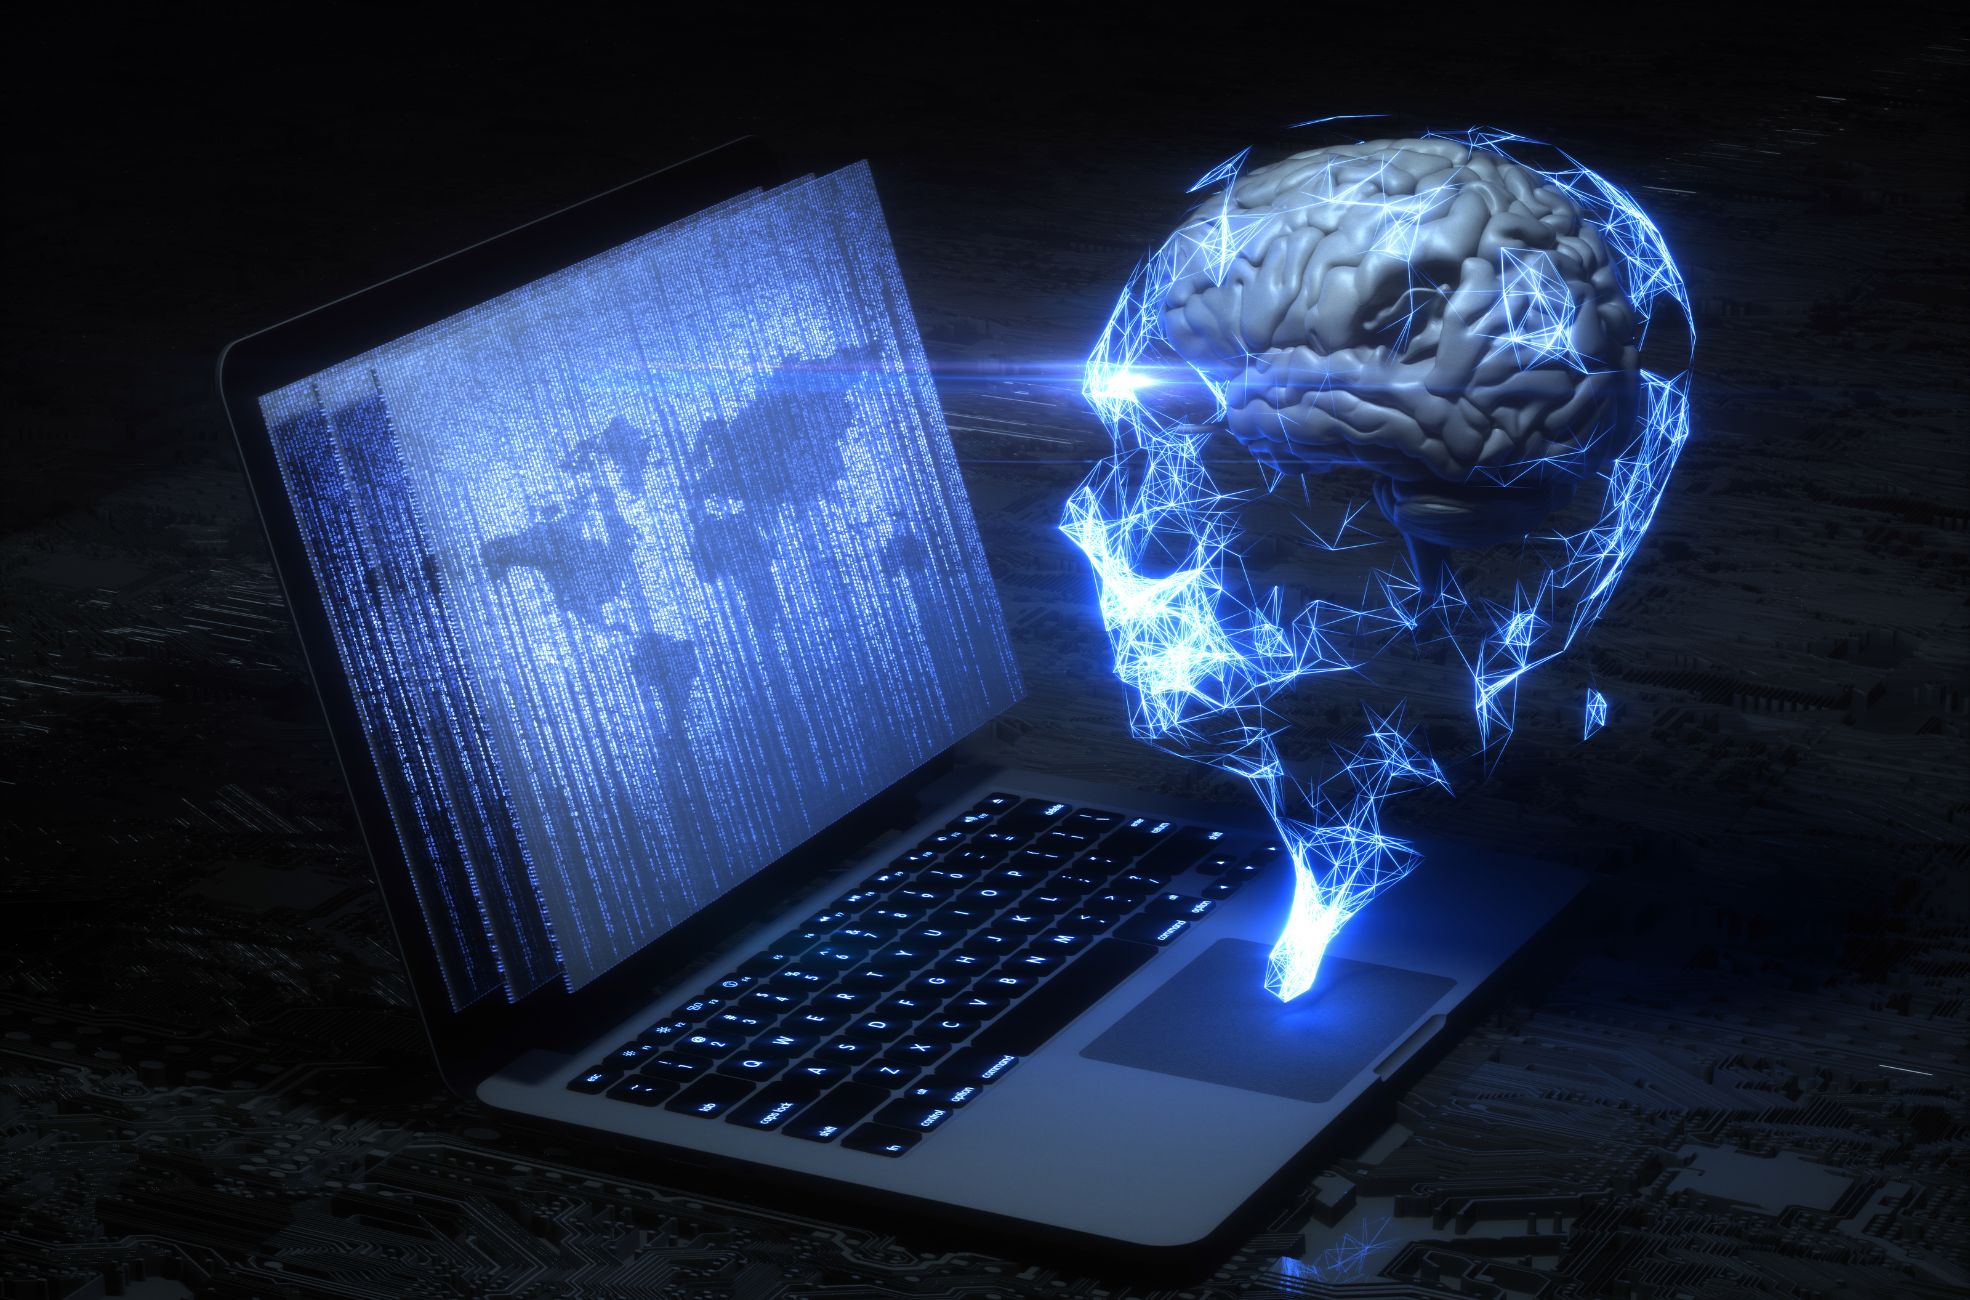 Stock Photo Showing Artificial Intelligence Through Laptop